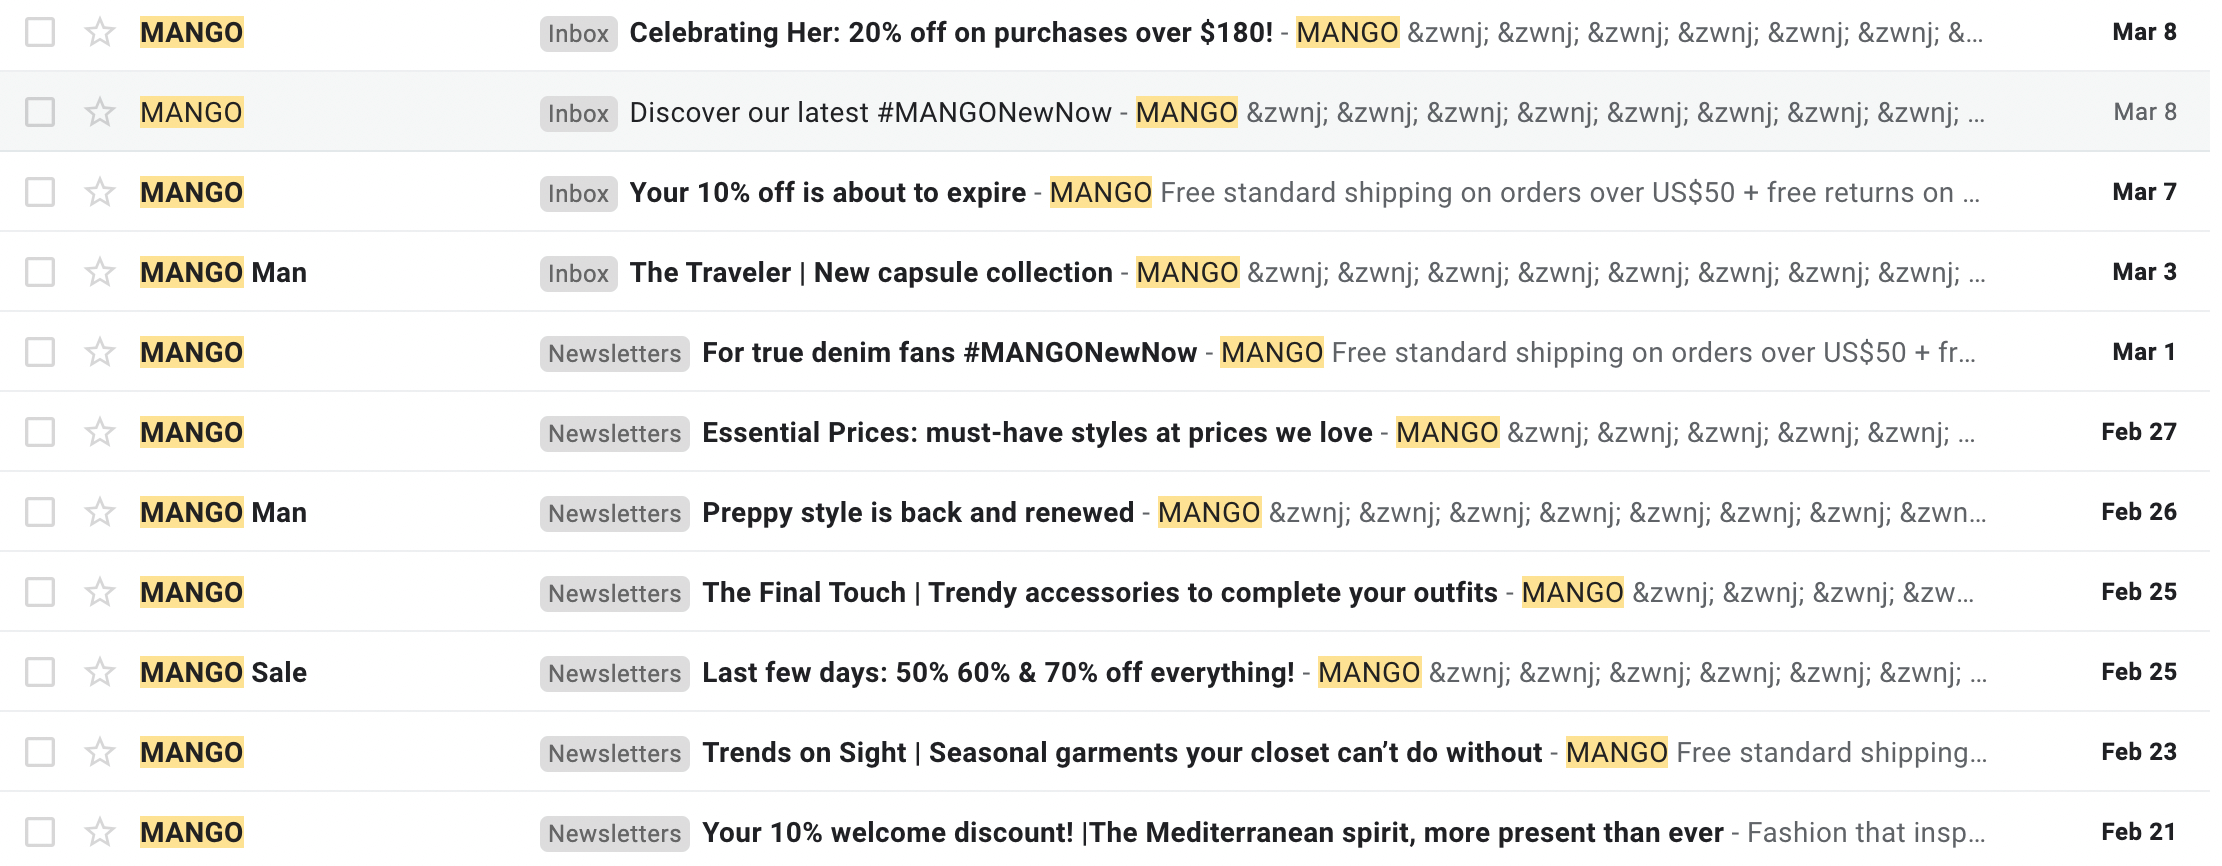 Emails by Mango